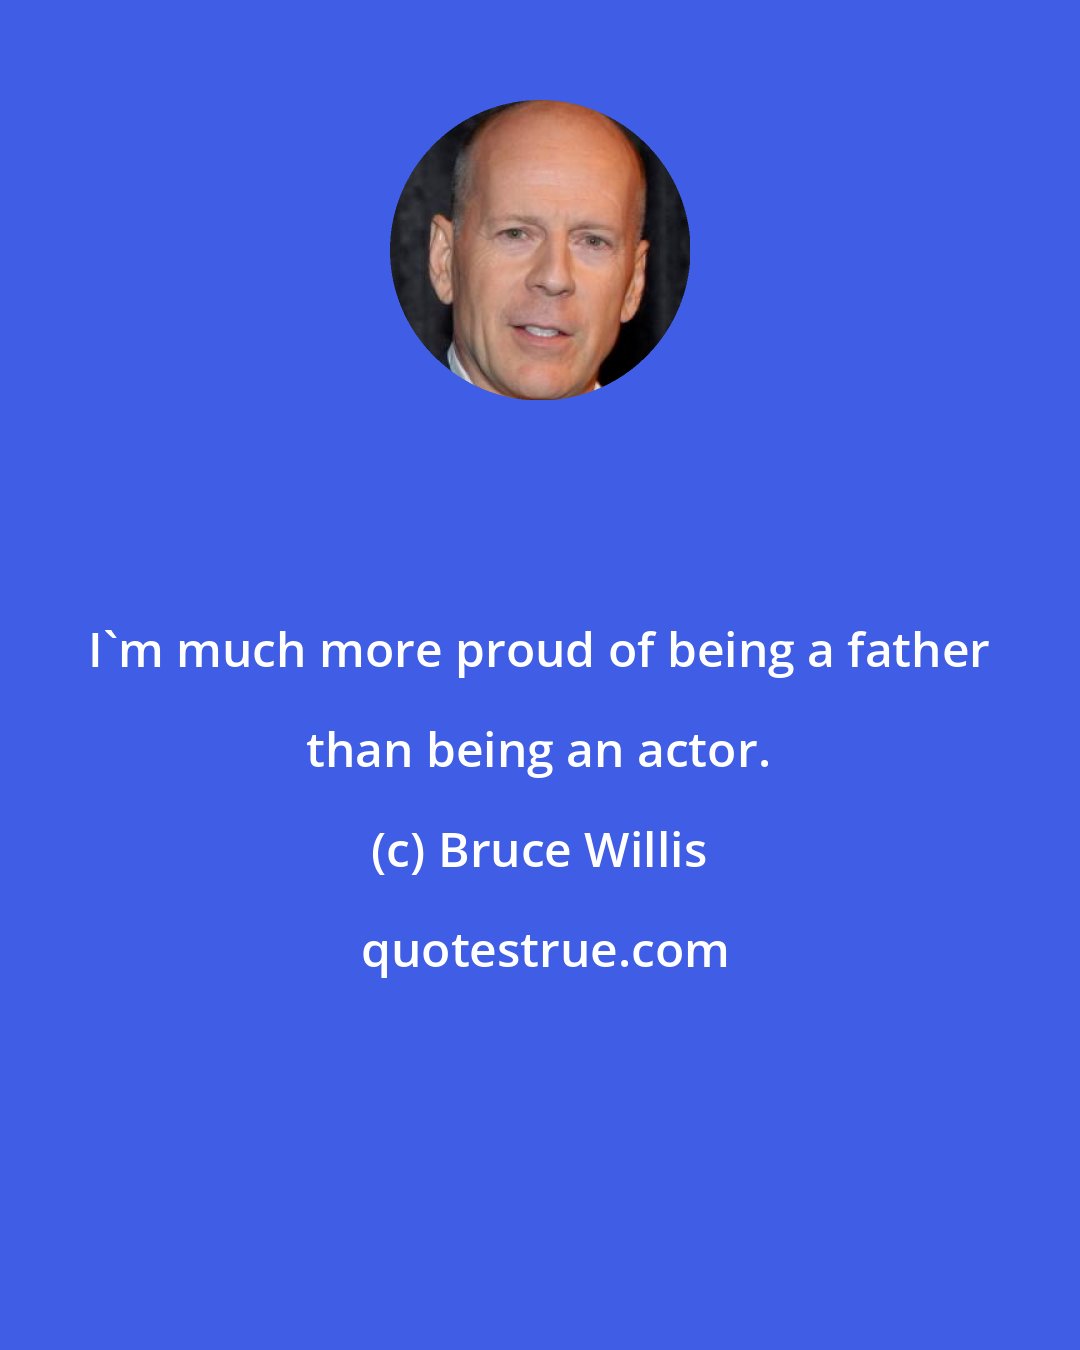 Bruce Willis: I'm much more proud of being a father than being an actor.